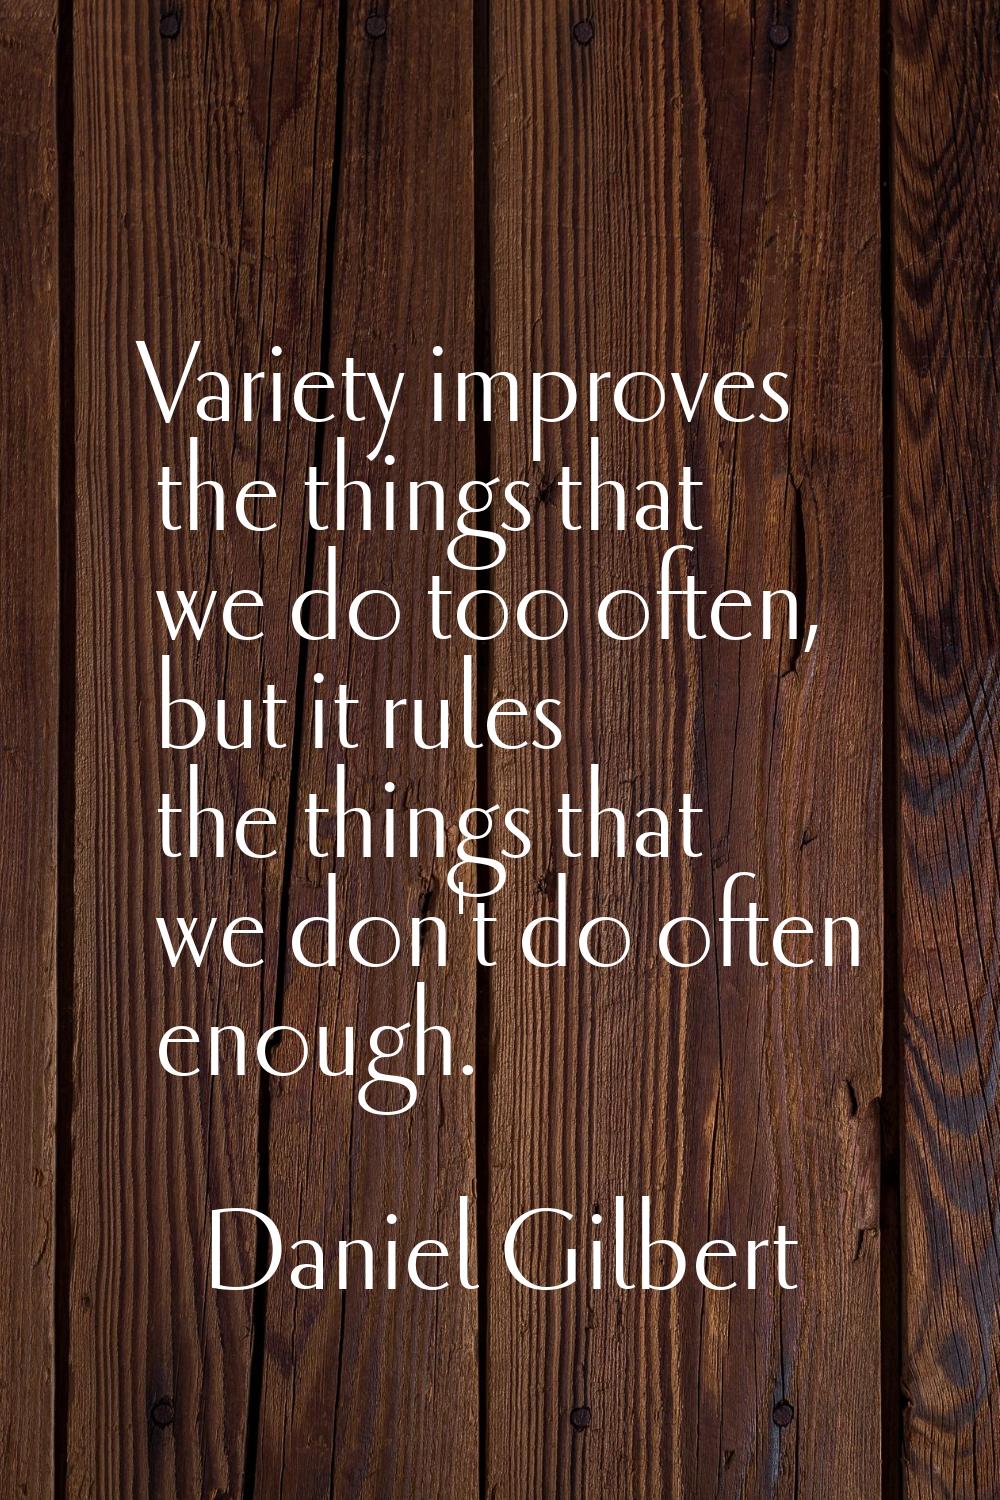 Variety improves the things that we do too often, but it rules the things that we don't do often en